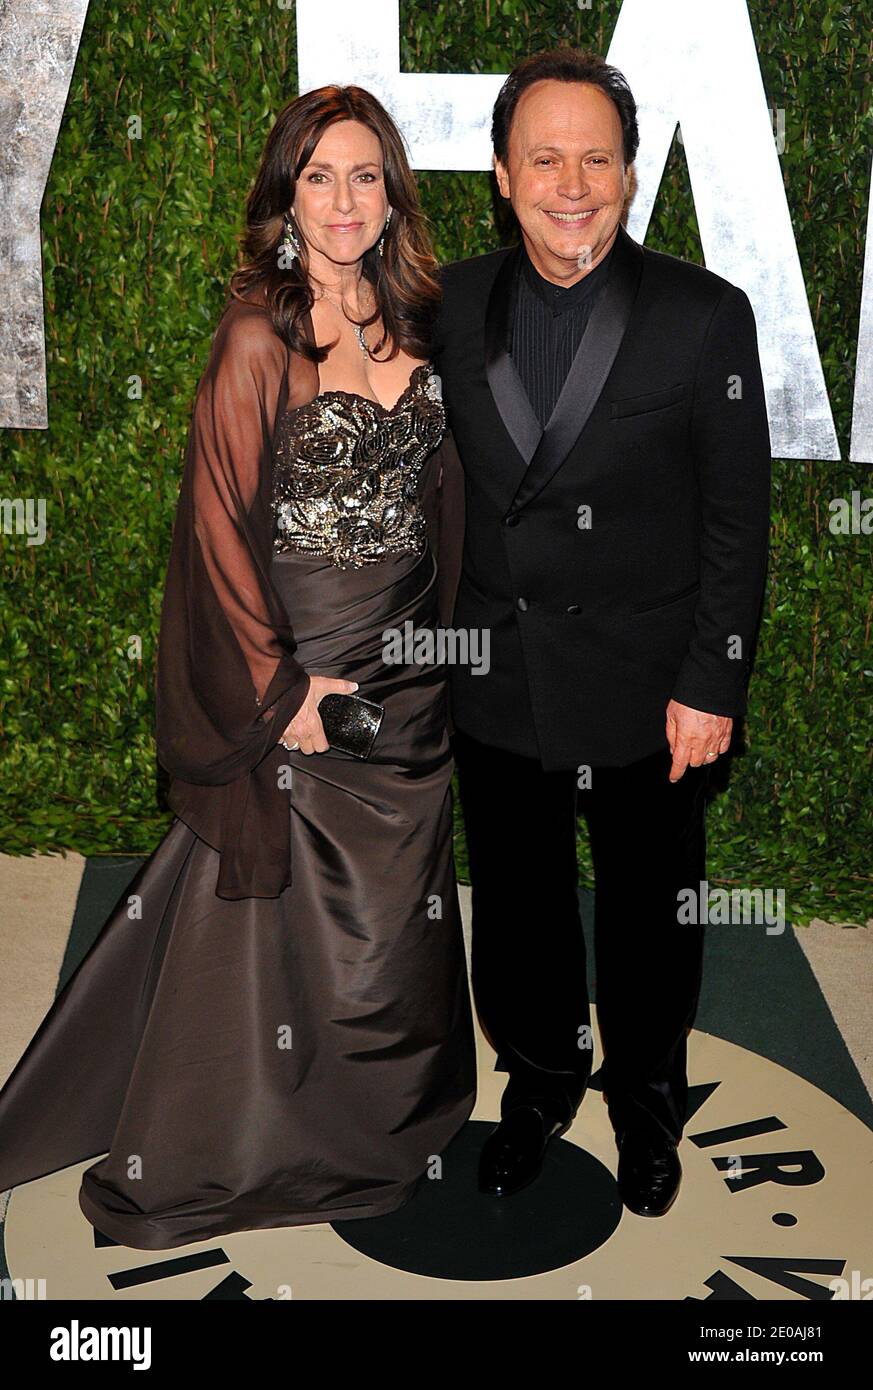 Billy Crystal and wife Janice arriving at the 2012 Vanity Fair Oscar Party, hosted by Graydon Carter, held at the Sunset Tower Hotel in Los Angeles, CA on February 26, 2012. Photo by Vince Bucci/ABACAPRESS.COM Stock Photo